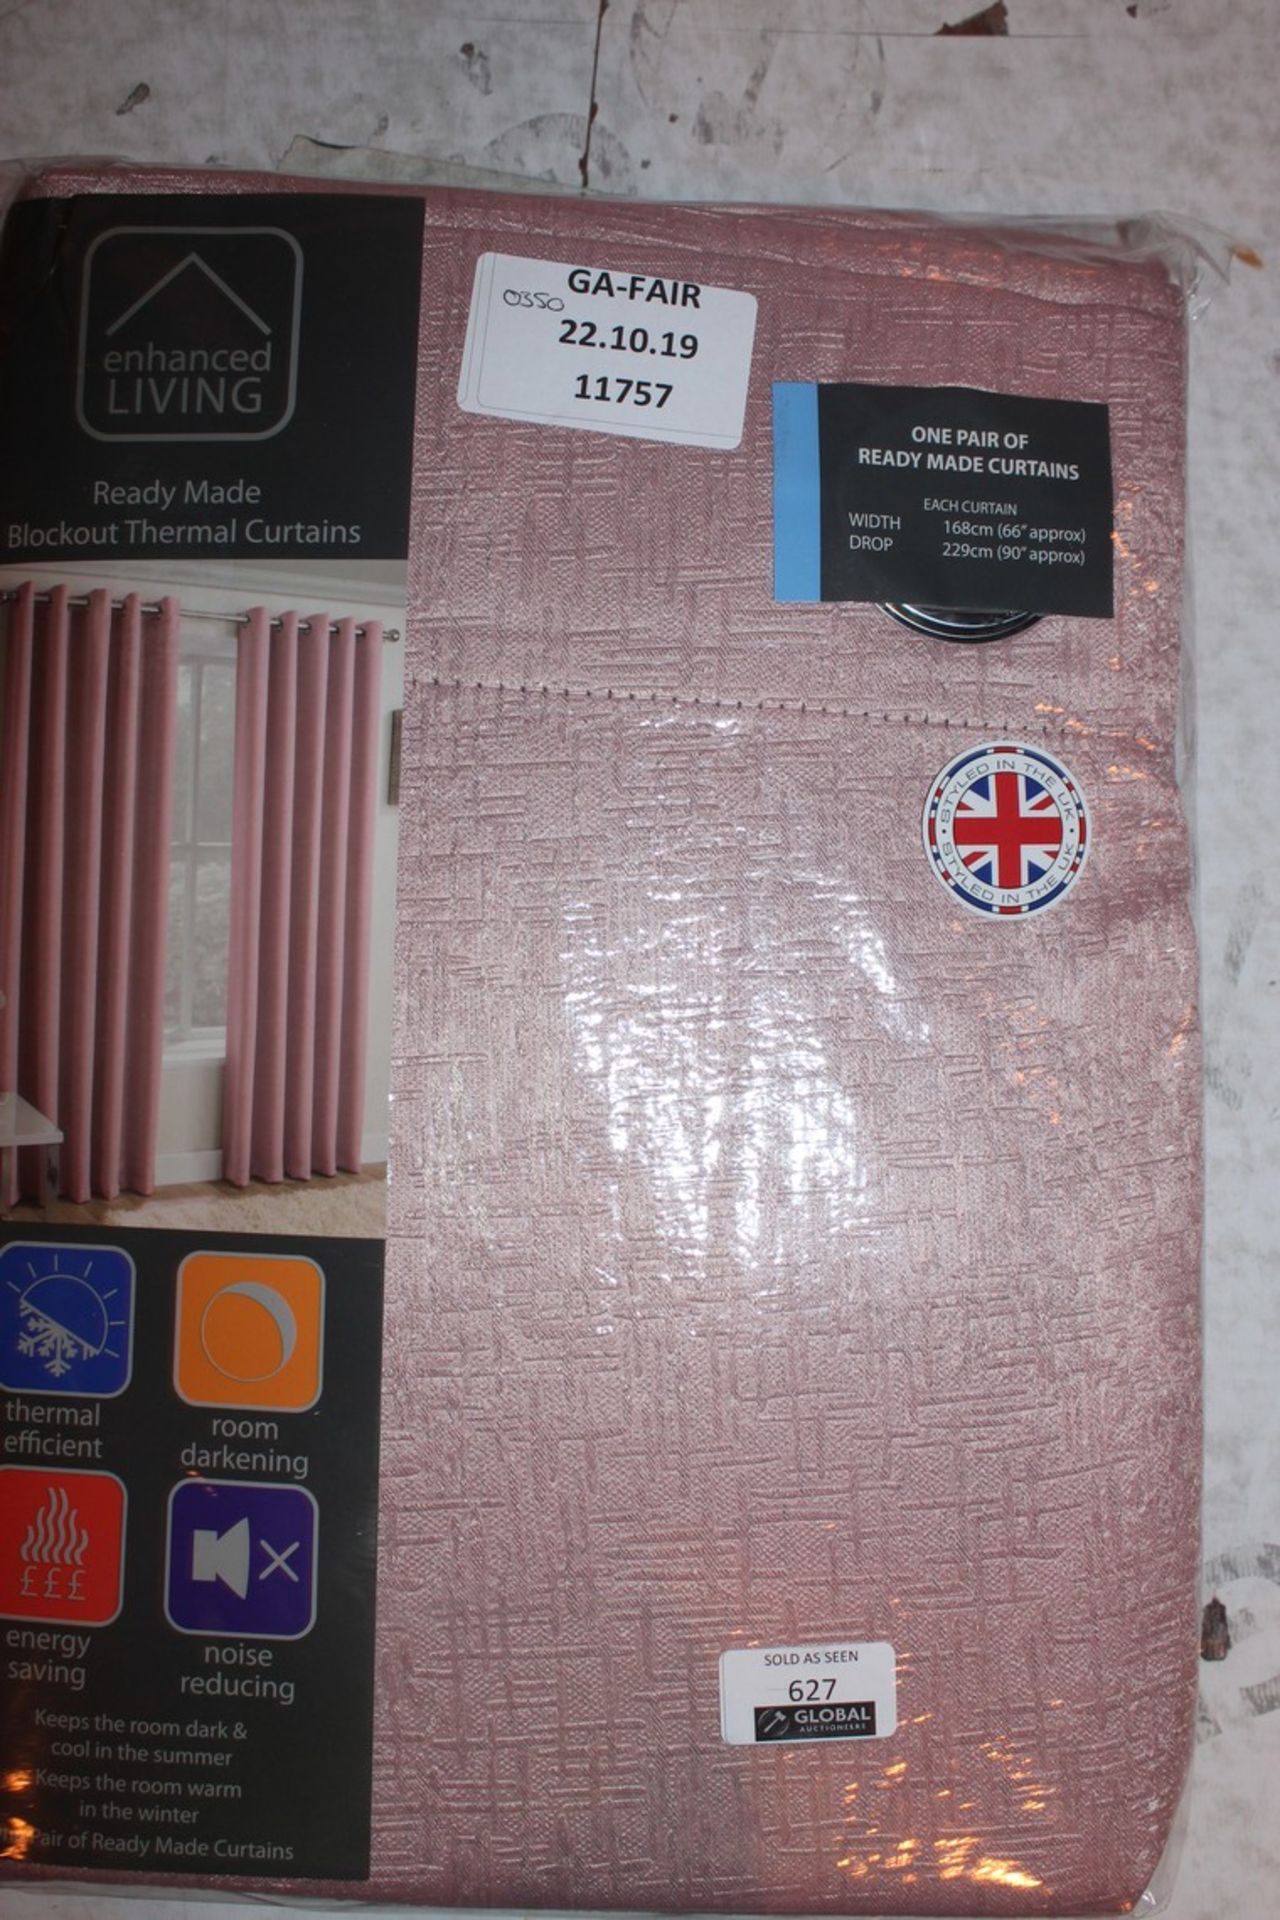 Bagged Pair of 168 x 229cm Enhanced Living Ready Made Curtains RRP £45 (11757) (Public Viewing and